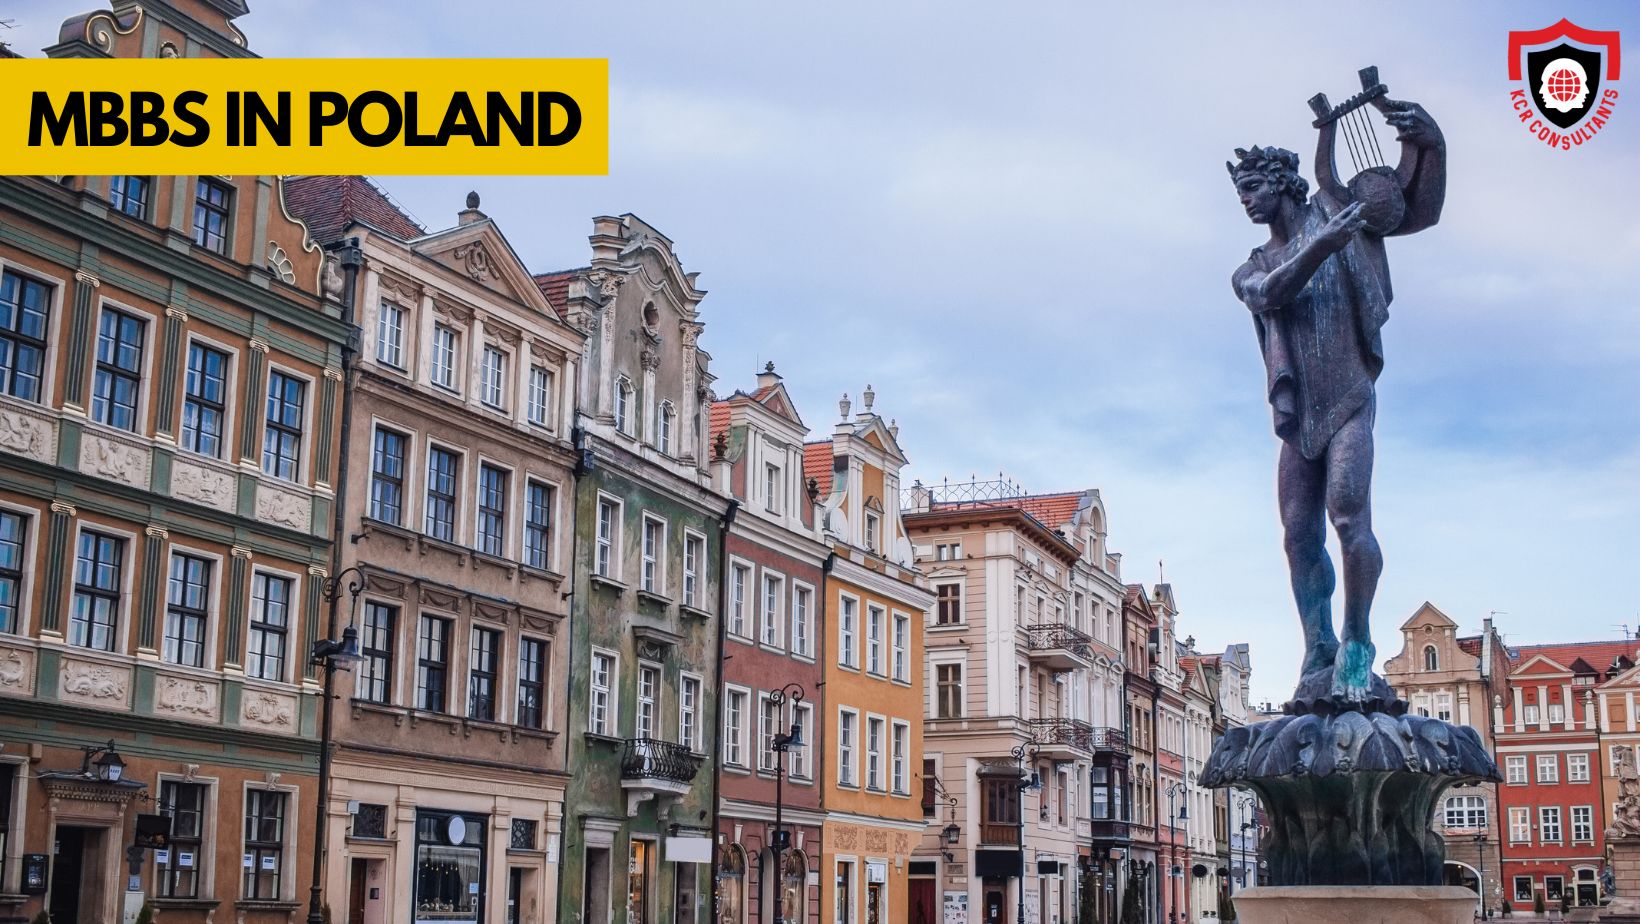 MBBS IN EUROPE IN POLAND